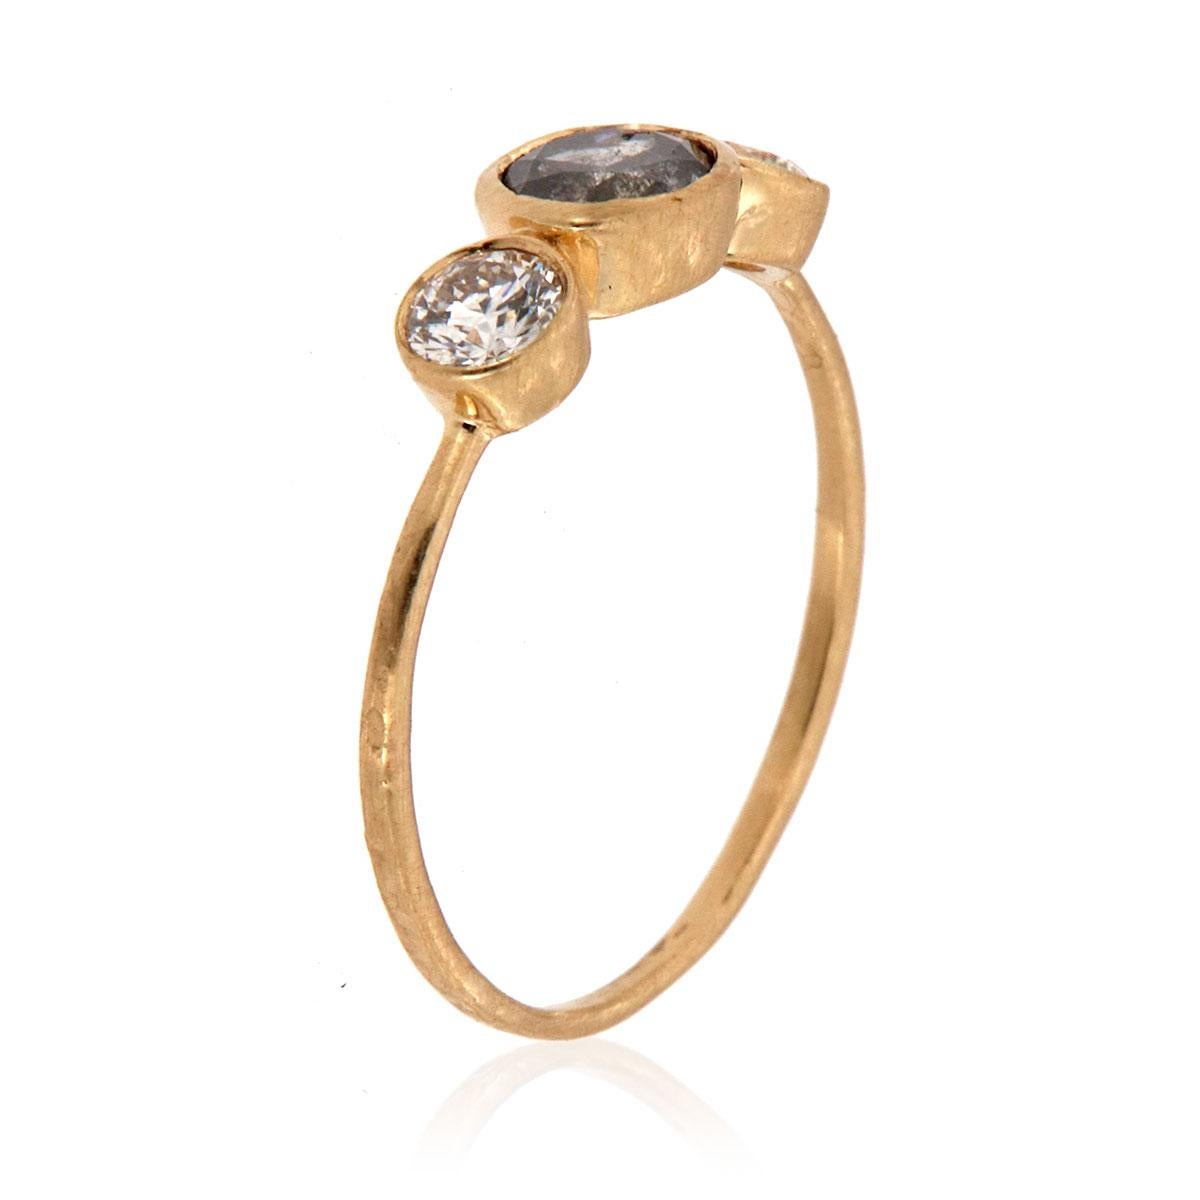 This delicately handcrafted, one-of-a-kind rustic, organically designed ring features a trilogy of three round diamonds. A 0.48 -carat Salt & Pepper center flanked by white round brilliant diamonds in a total of 0.33 carat. The 1.2 mm wide lightly